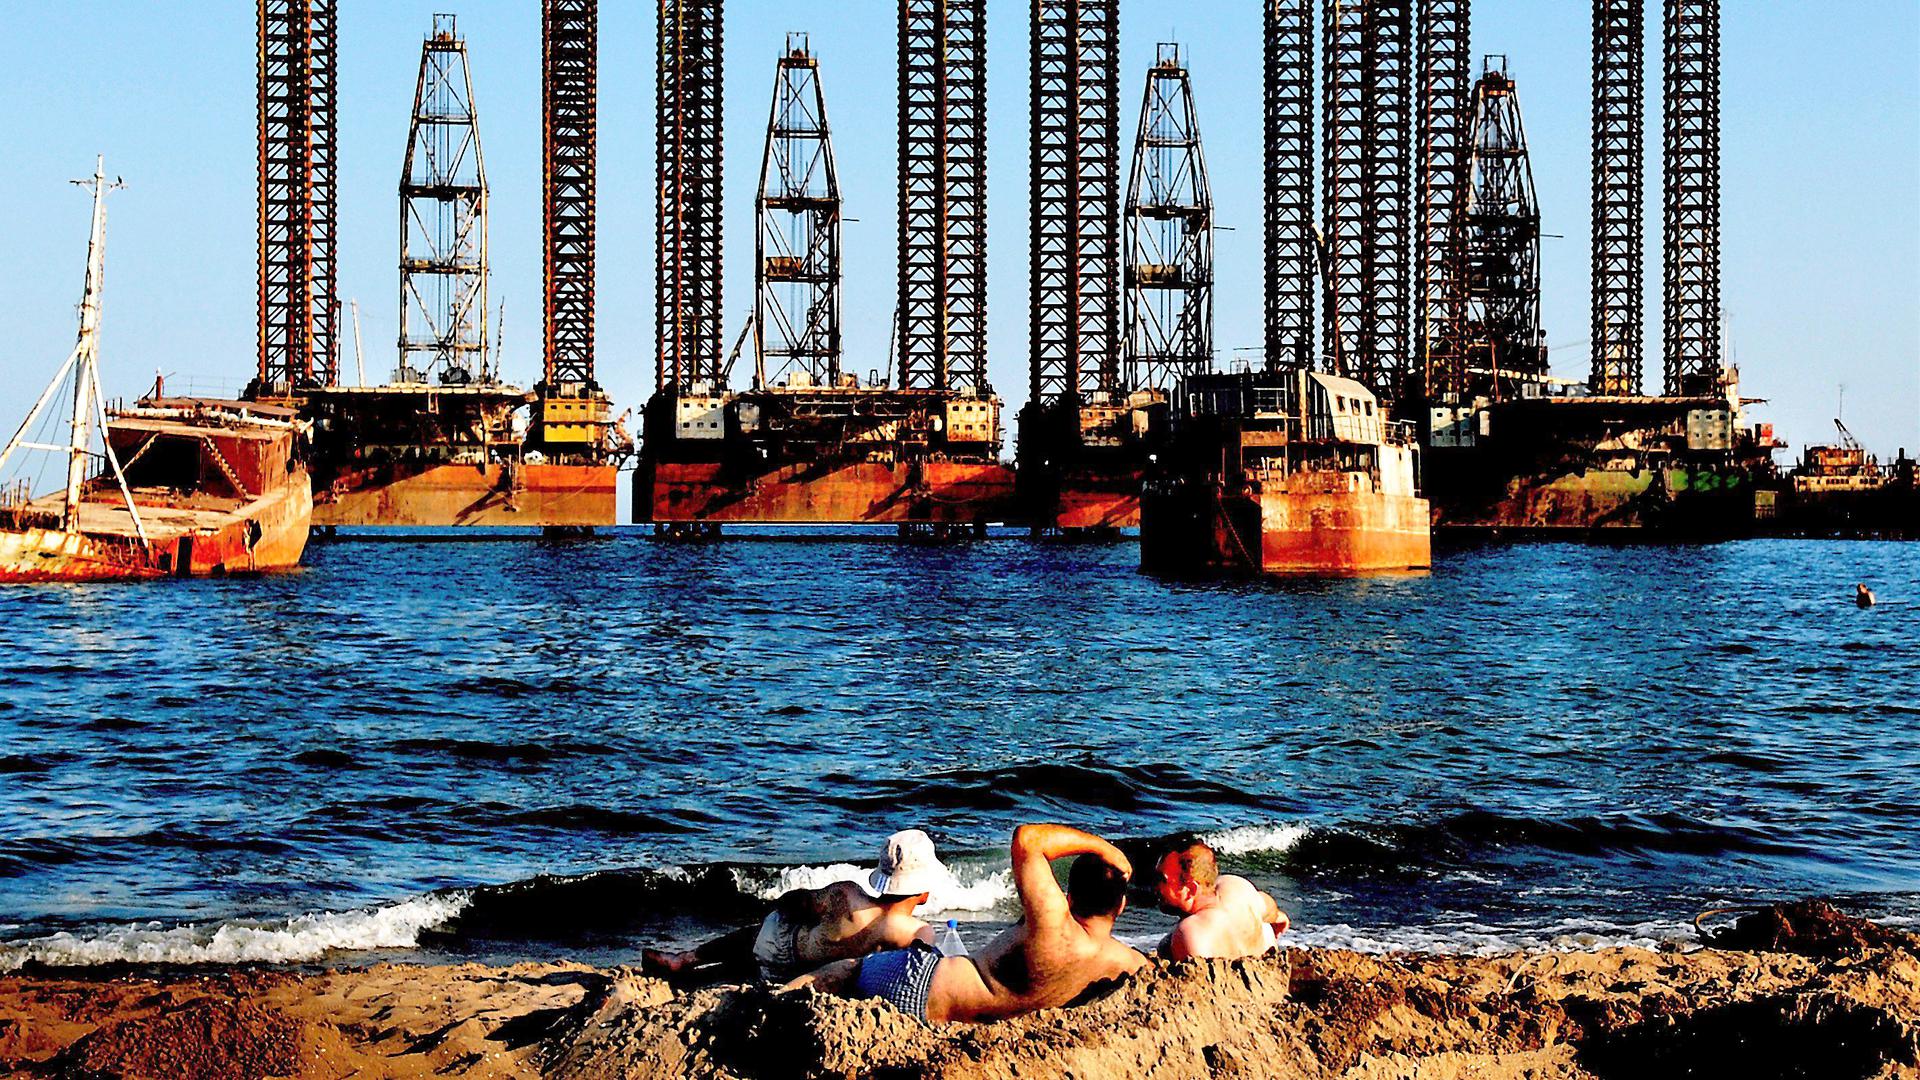 A picture made available 29 July shows workers from Oil platforms enjoy the sun on the beach of Caspian See near Azerbaijan capital city Baku, 23 July 2008. Crude oil prices above 120 US dollars a barrel are abnormal and could fall to around 78 US dollars under the right circumstances, OPEC President Chakib Khelil said in Jakarta on 29 July 2008. EPA/FILIP SINGER +++ dpa-Bildfunk +++